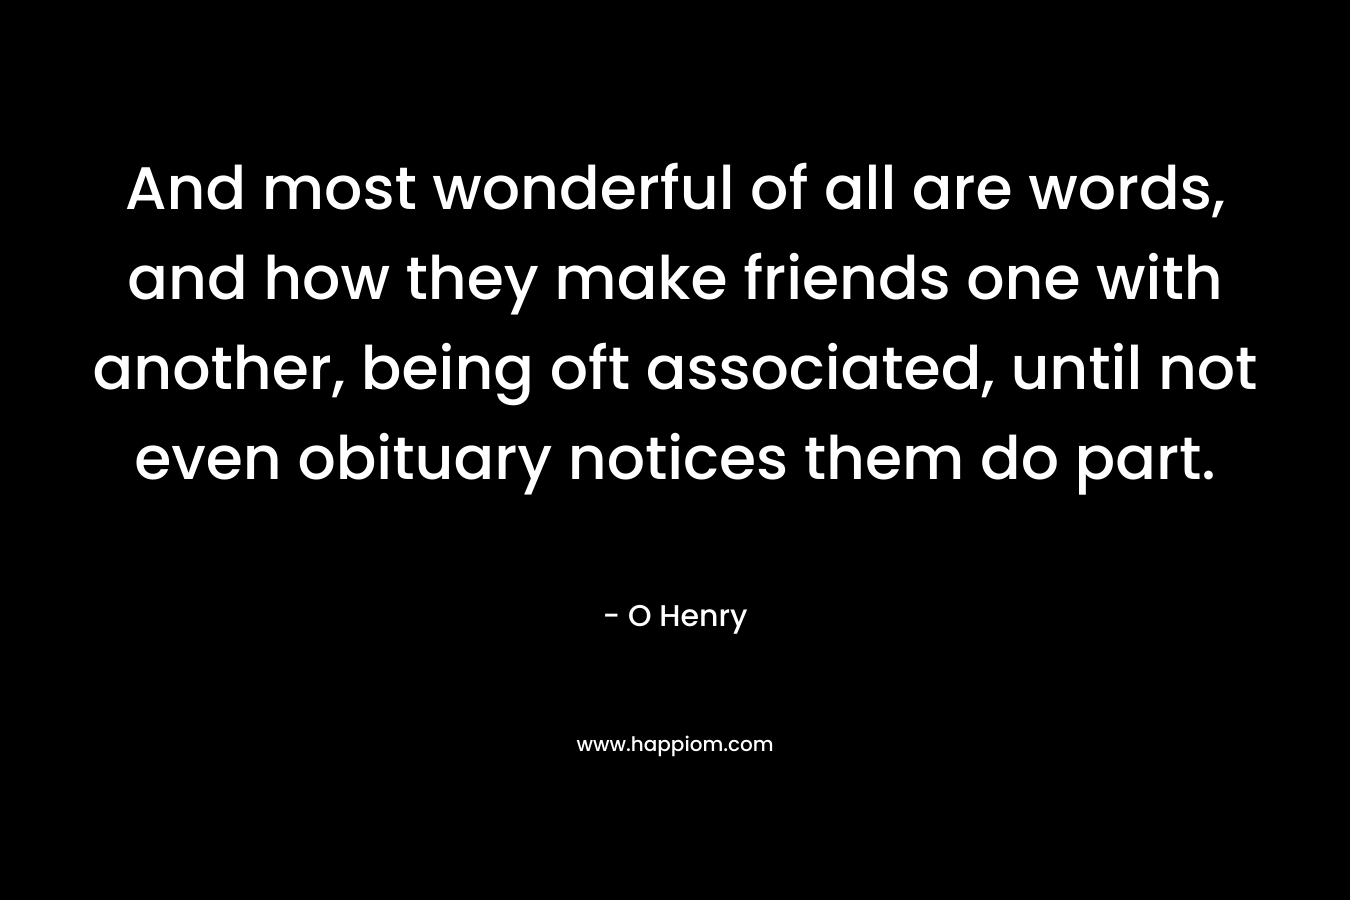 And most wonderful of all are words, and how they make friends one with another, being oft associated, until not even obituary notices them do part. – O Henry